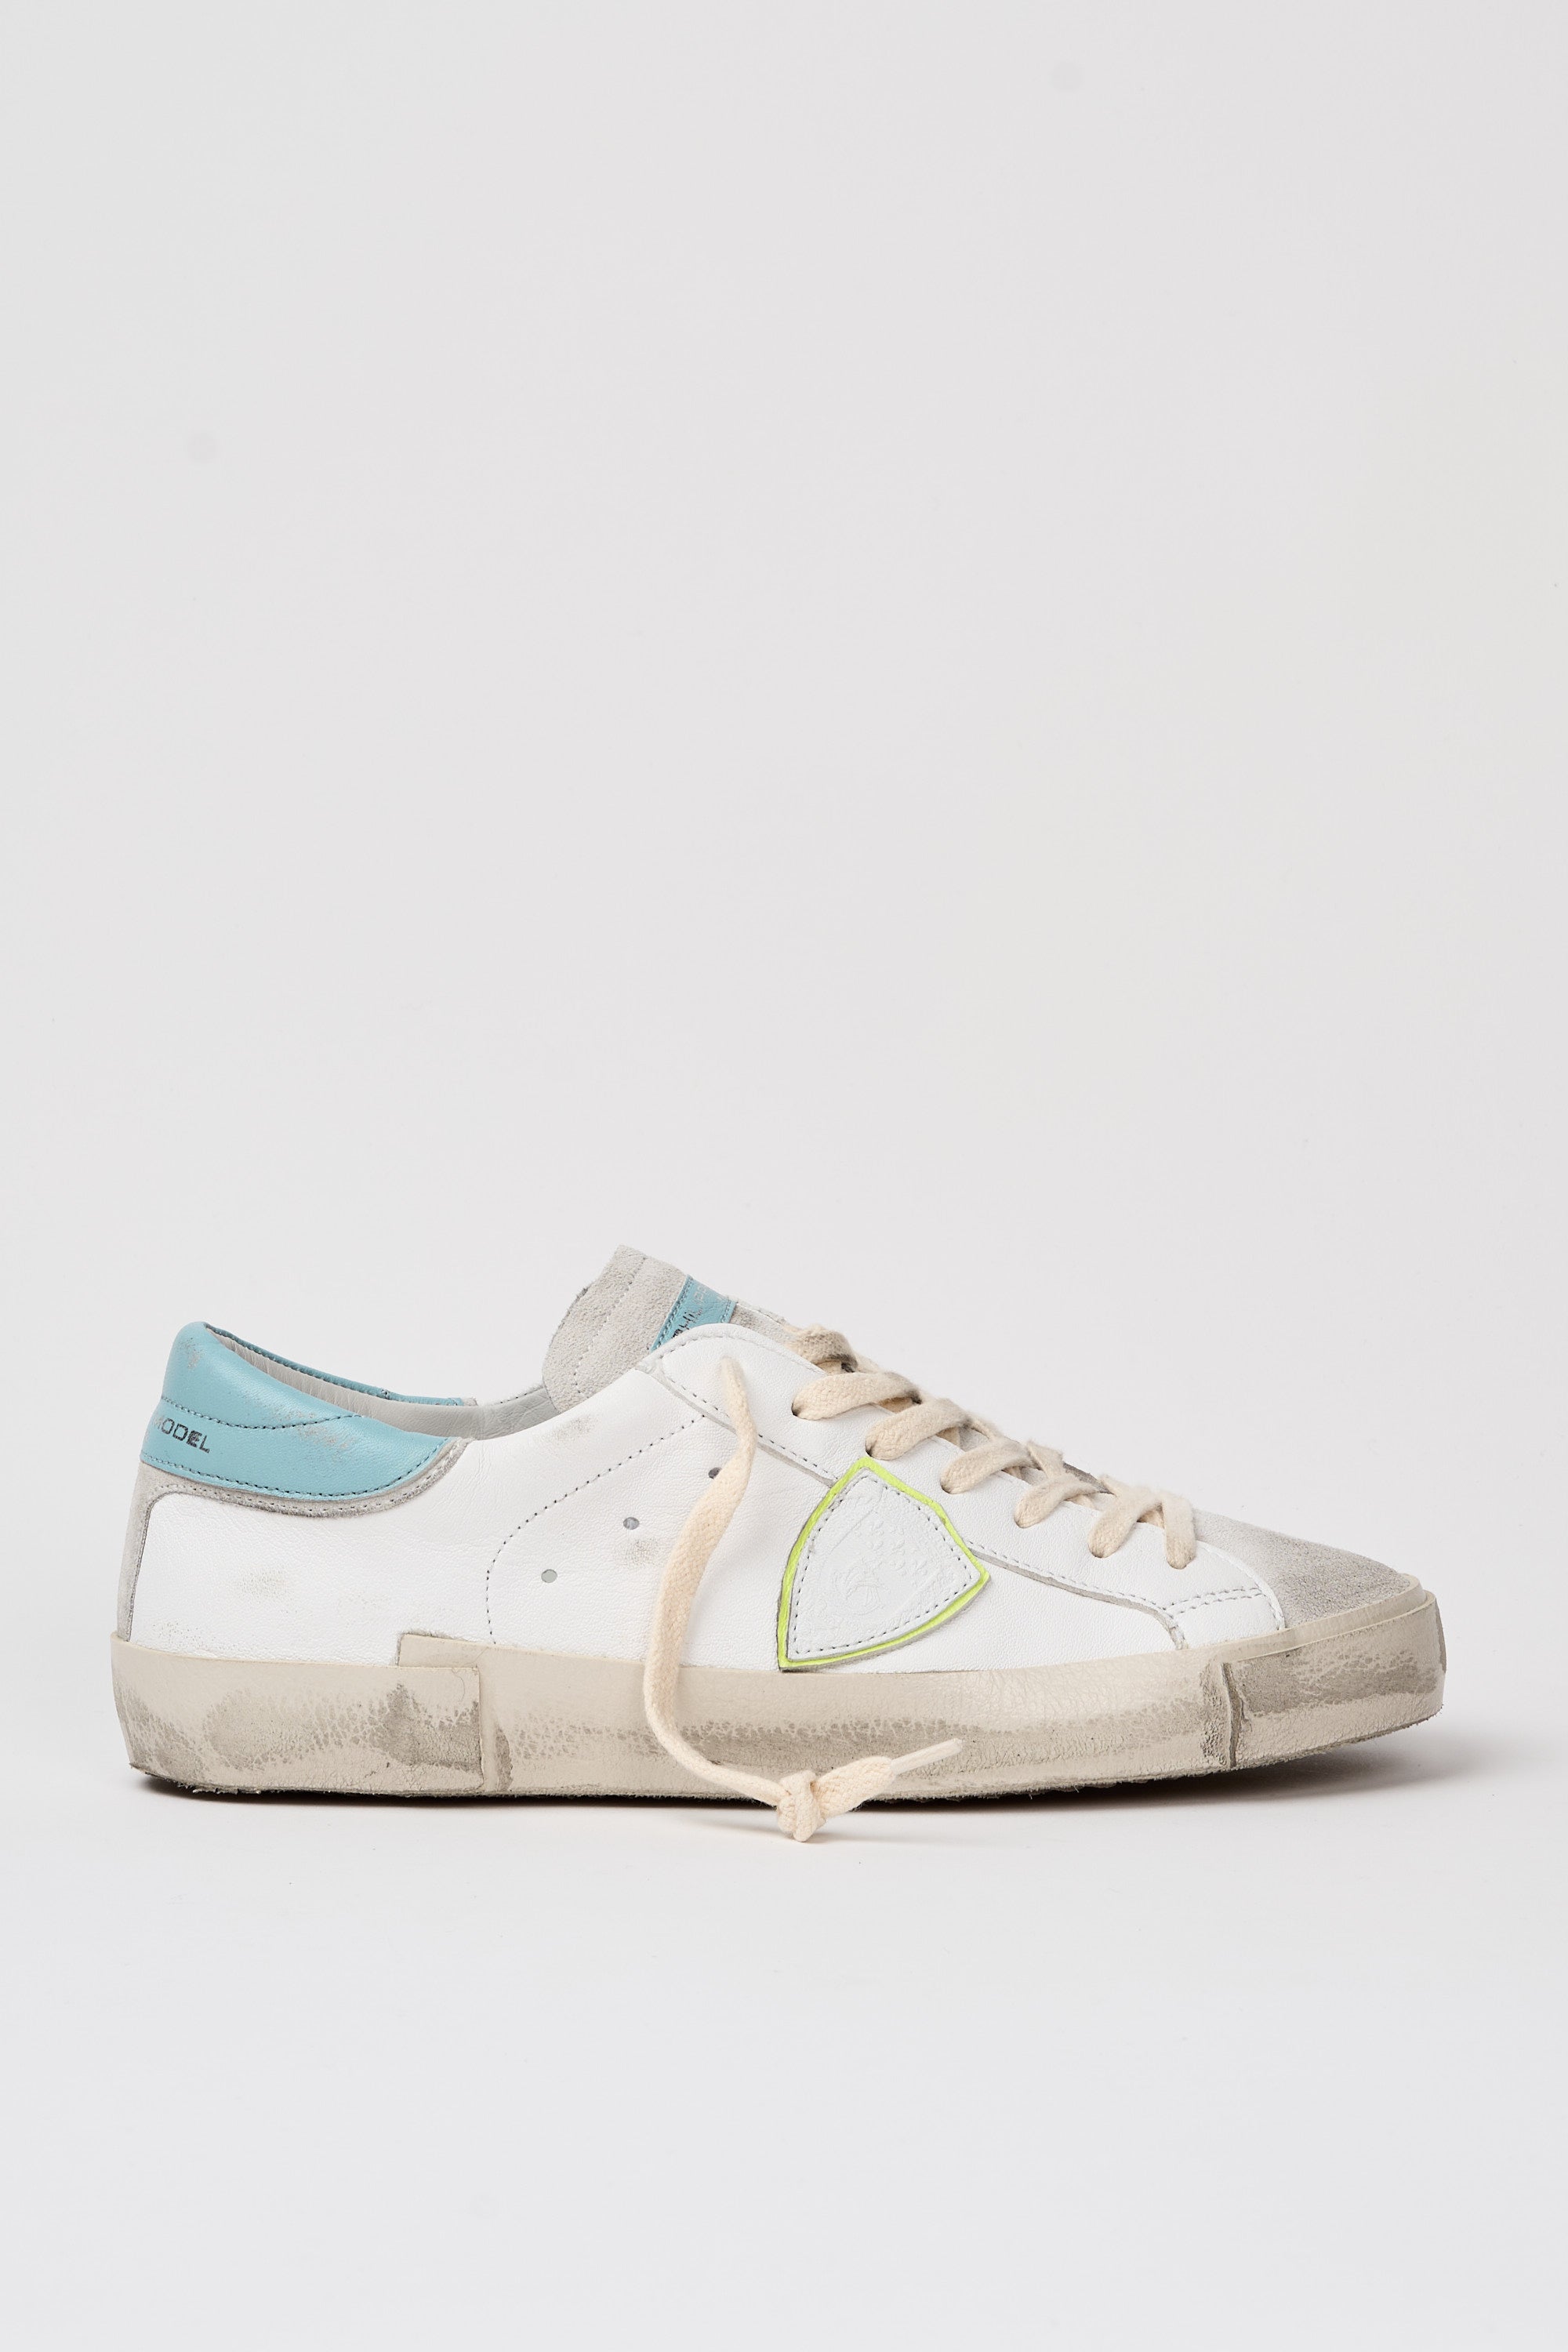 Philippe Model Sneakers Prsx Leather/Suede White/Sky Blue-1